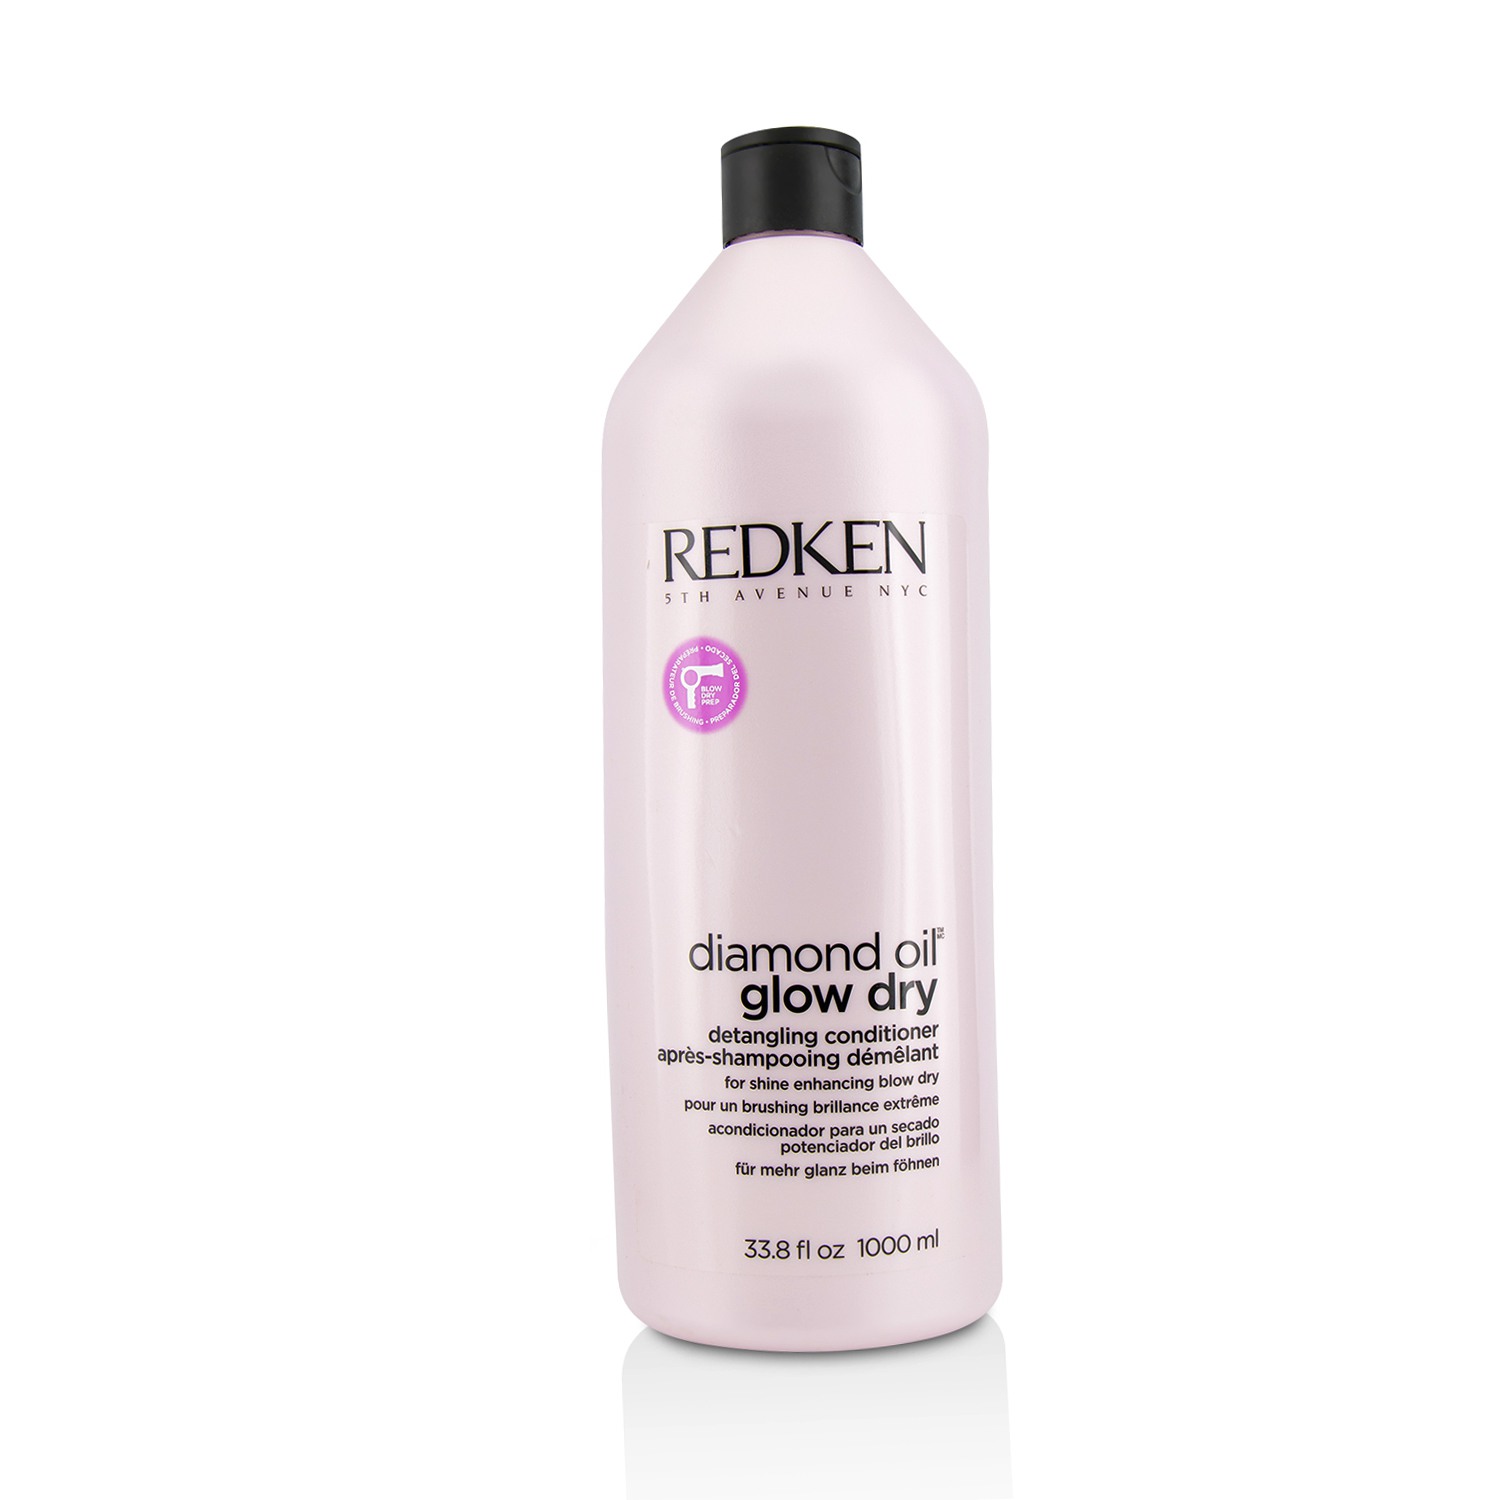 Diamond Oil Glow Dry Detangling Conditioner (For Shine Enhancing Blow Dry) Redken Image